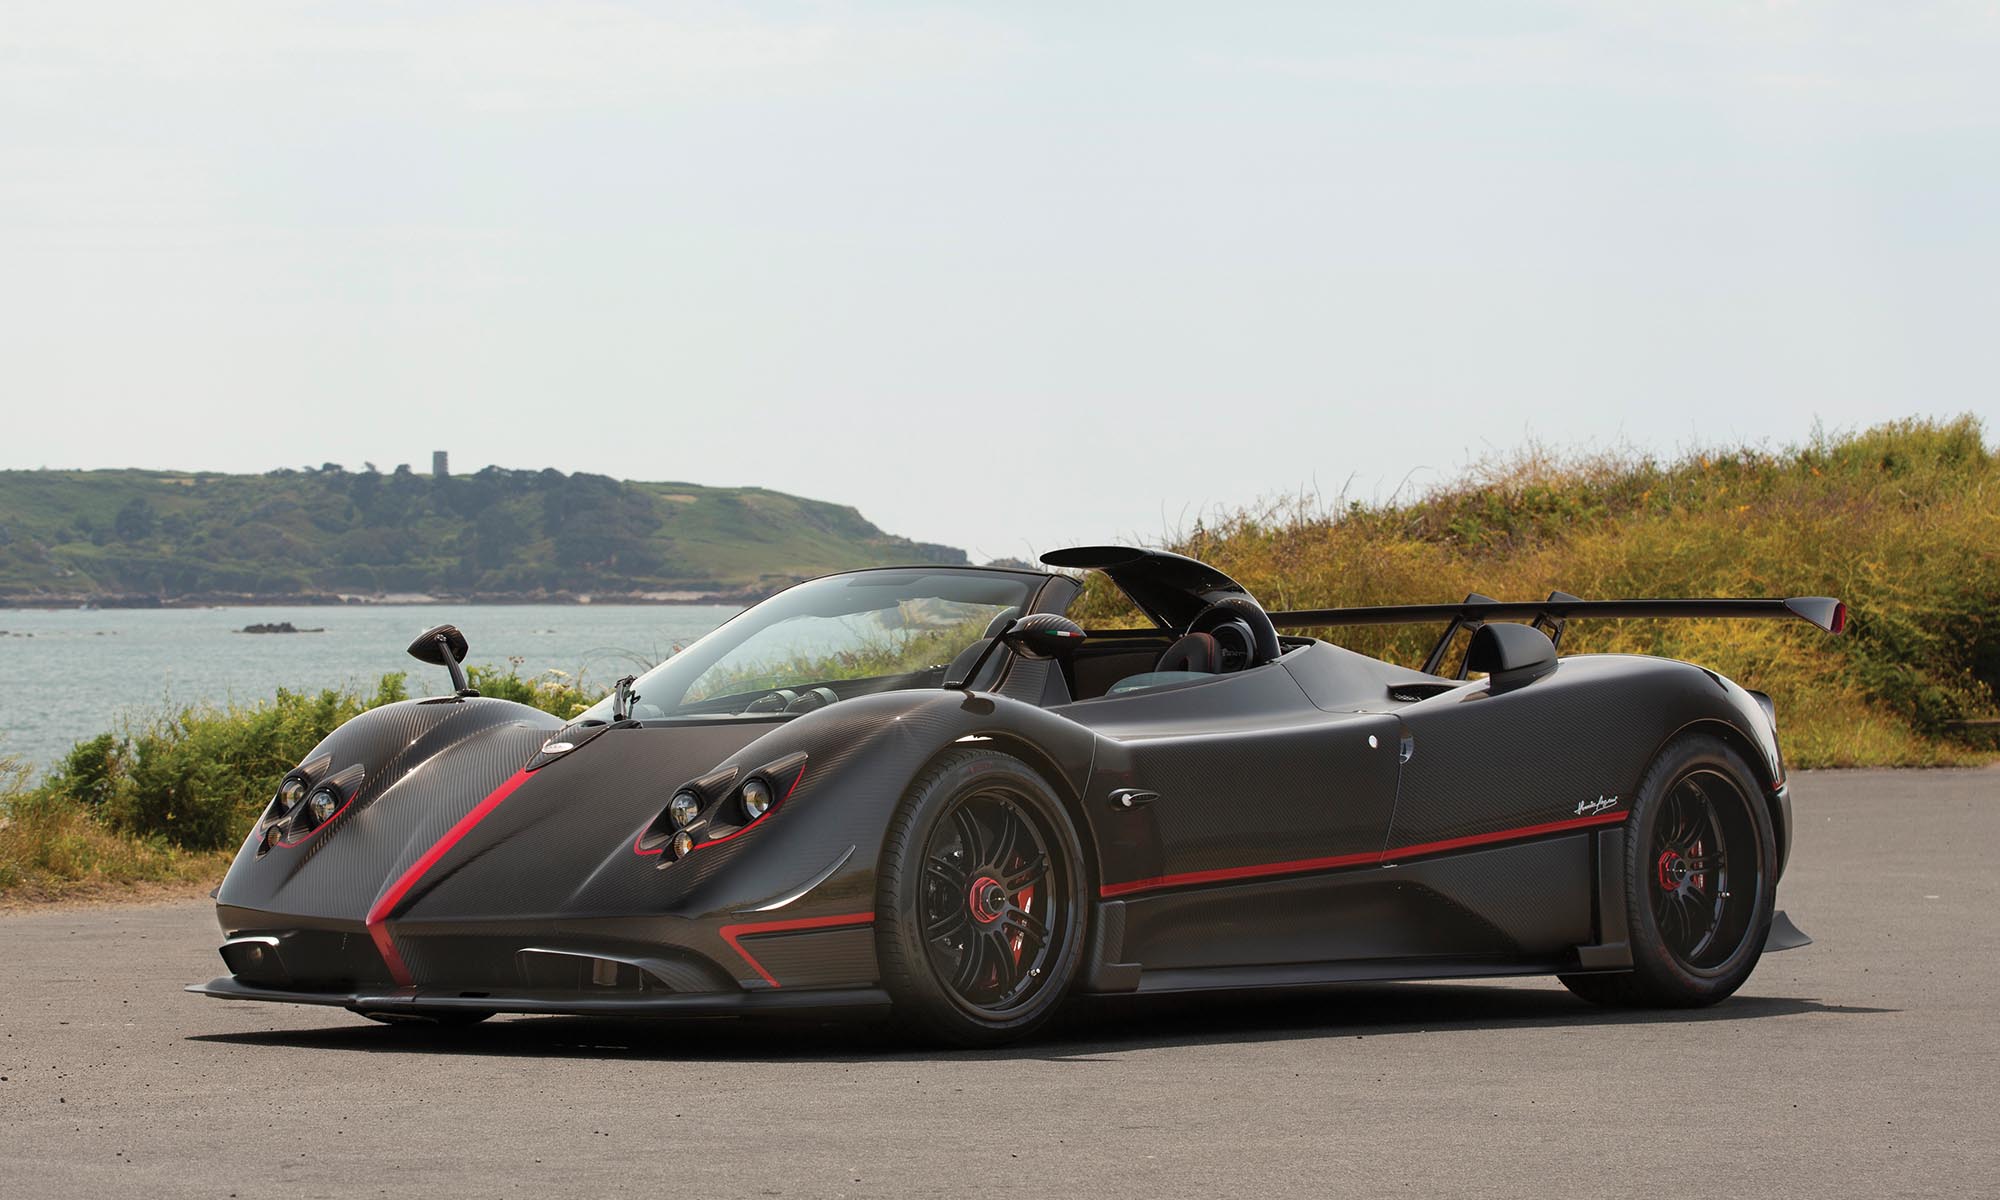 supercar, expensive car, luxury, luxury car, fastest car, speed, Pagani, Zonda, Pagani Zonda Aether, 760 AMG HP, Manual gearbox, youtube, video, rear wing, roof scoop, V12 engine, real car, three pedals, rear tires, cabin, Dhabi auction, Pagani Huayra Roadster BC, Zonda Aether